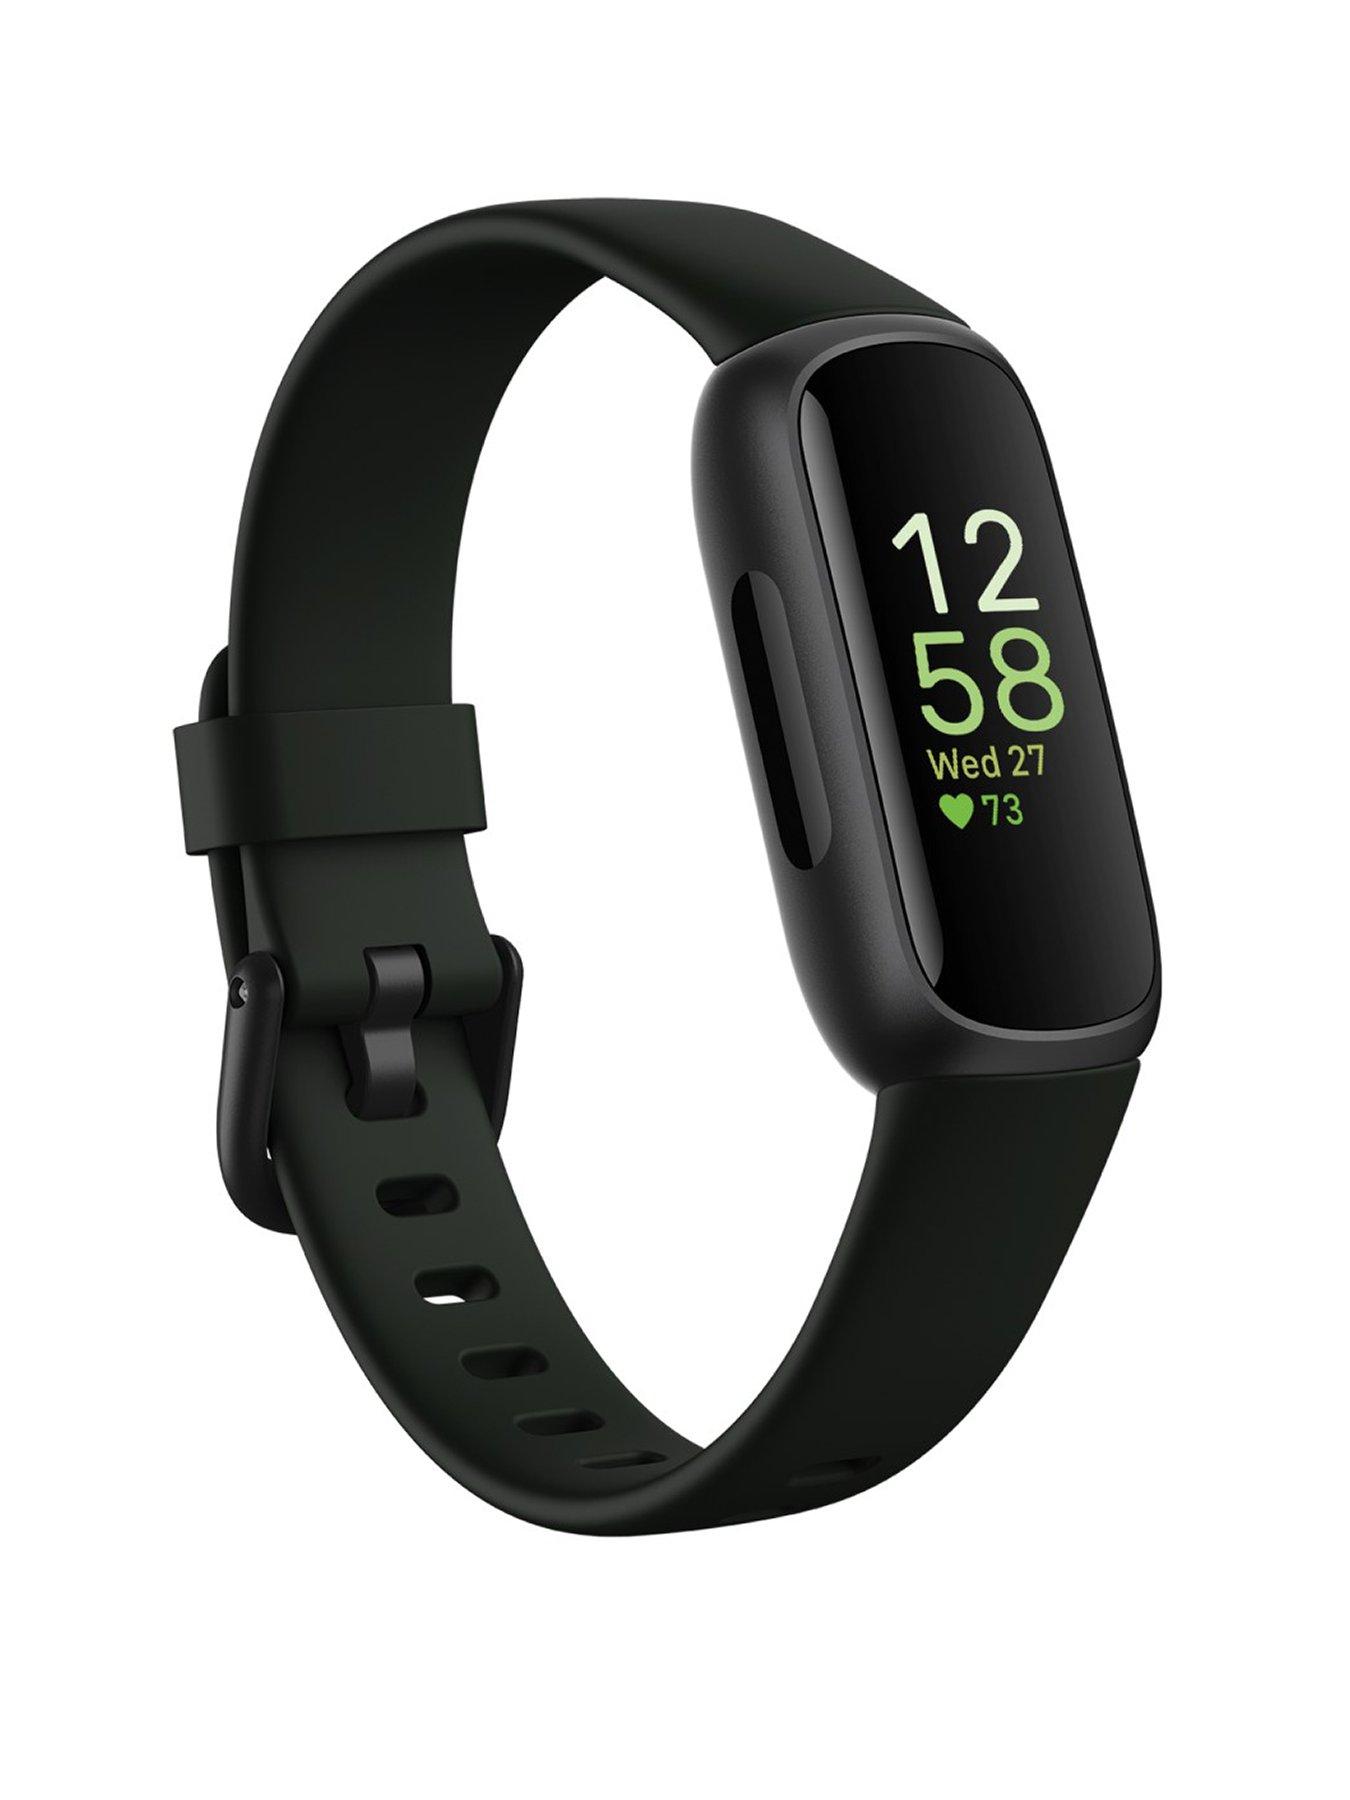 https://media.very.co.uk/i/very/V8WRG_SQ1_0000000004_BLACK_SLf/fitbit-inspire-3--nbspblackmidnight-zen-health-and-fitness-tracker-with-up-to-10-days-battery-lifenbspandroid-and-ios-compatible.jpg?$180x240_retinamobilex2$&$roundel_very$&p3_img=video_roundel